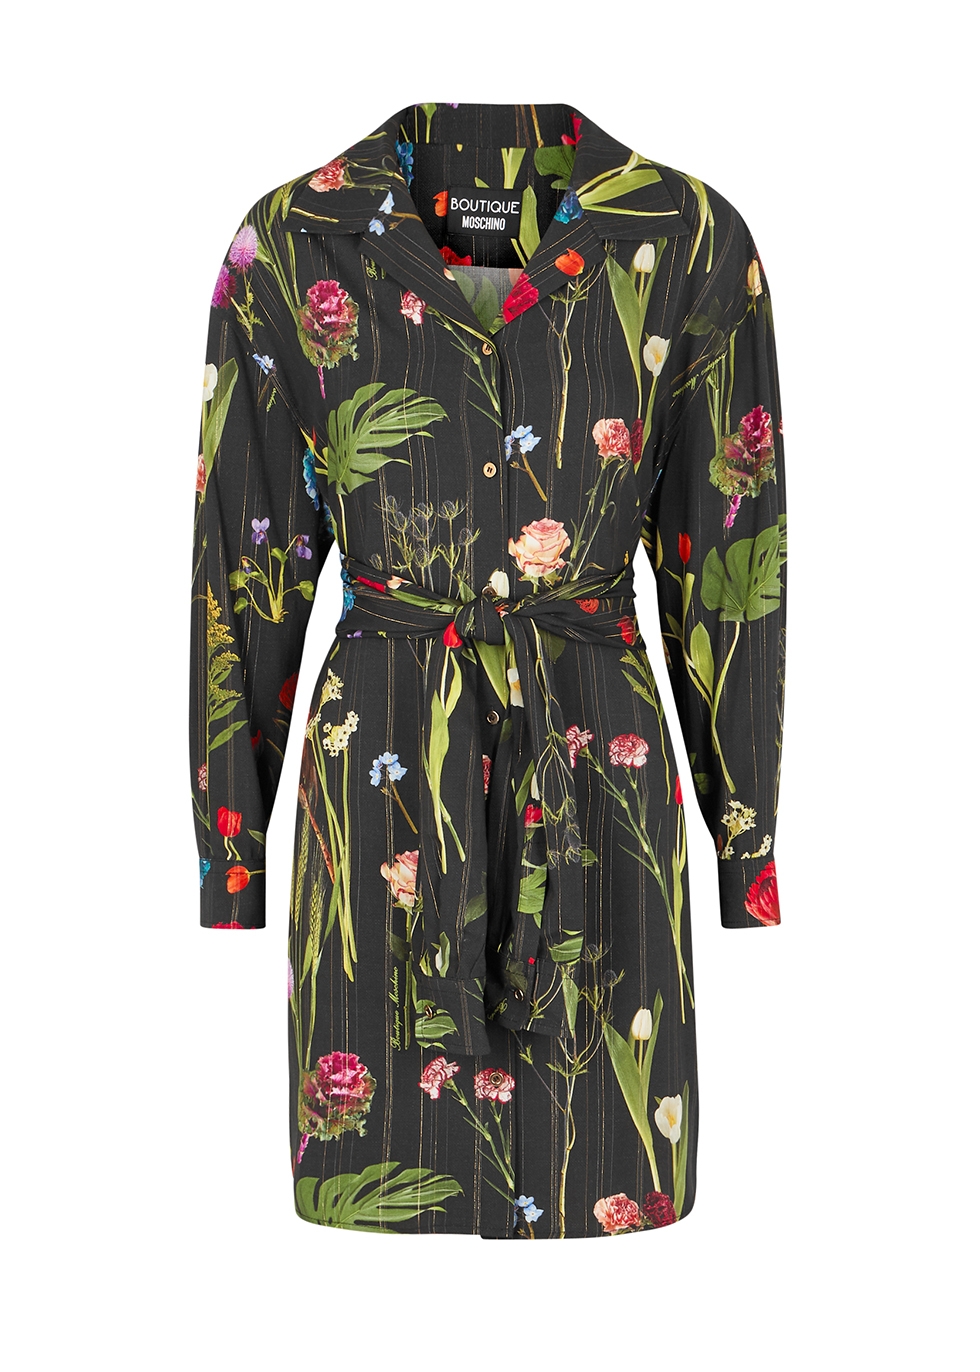 moschino floral dress